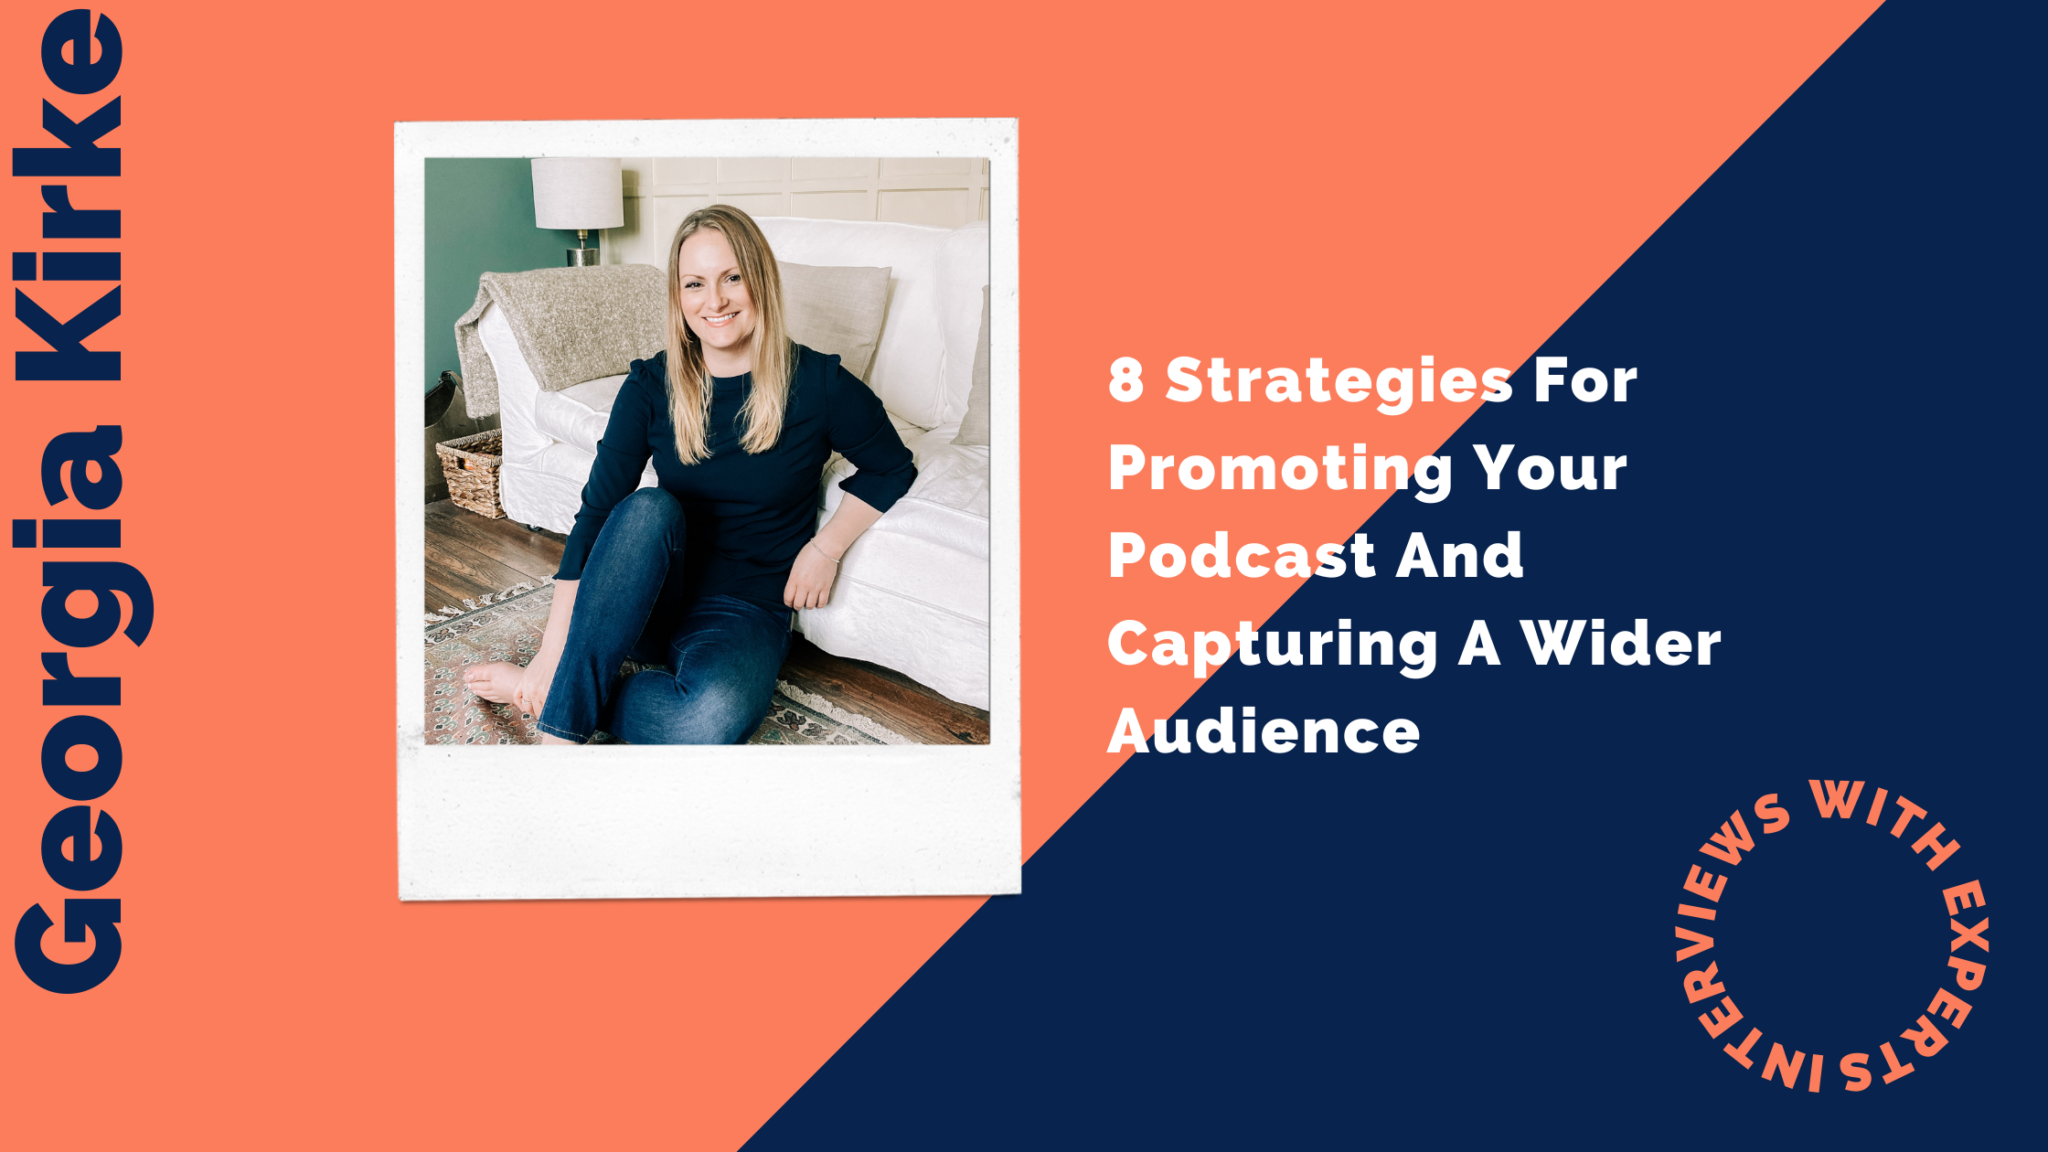 8 Strategies For Promoting Your Podcast And Capturing A Wider Audience